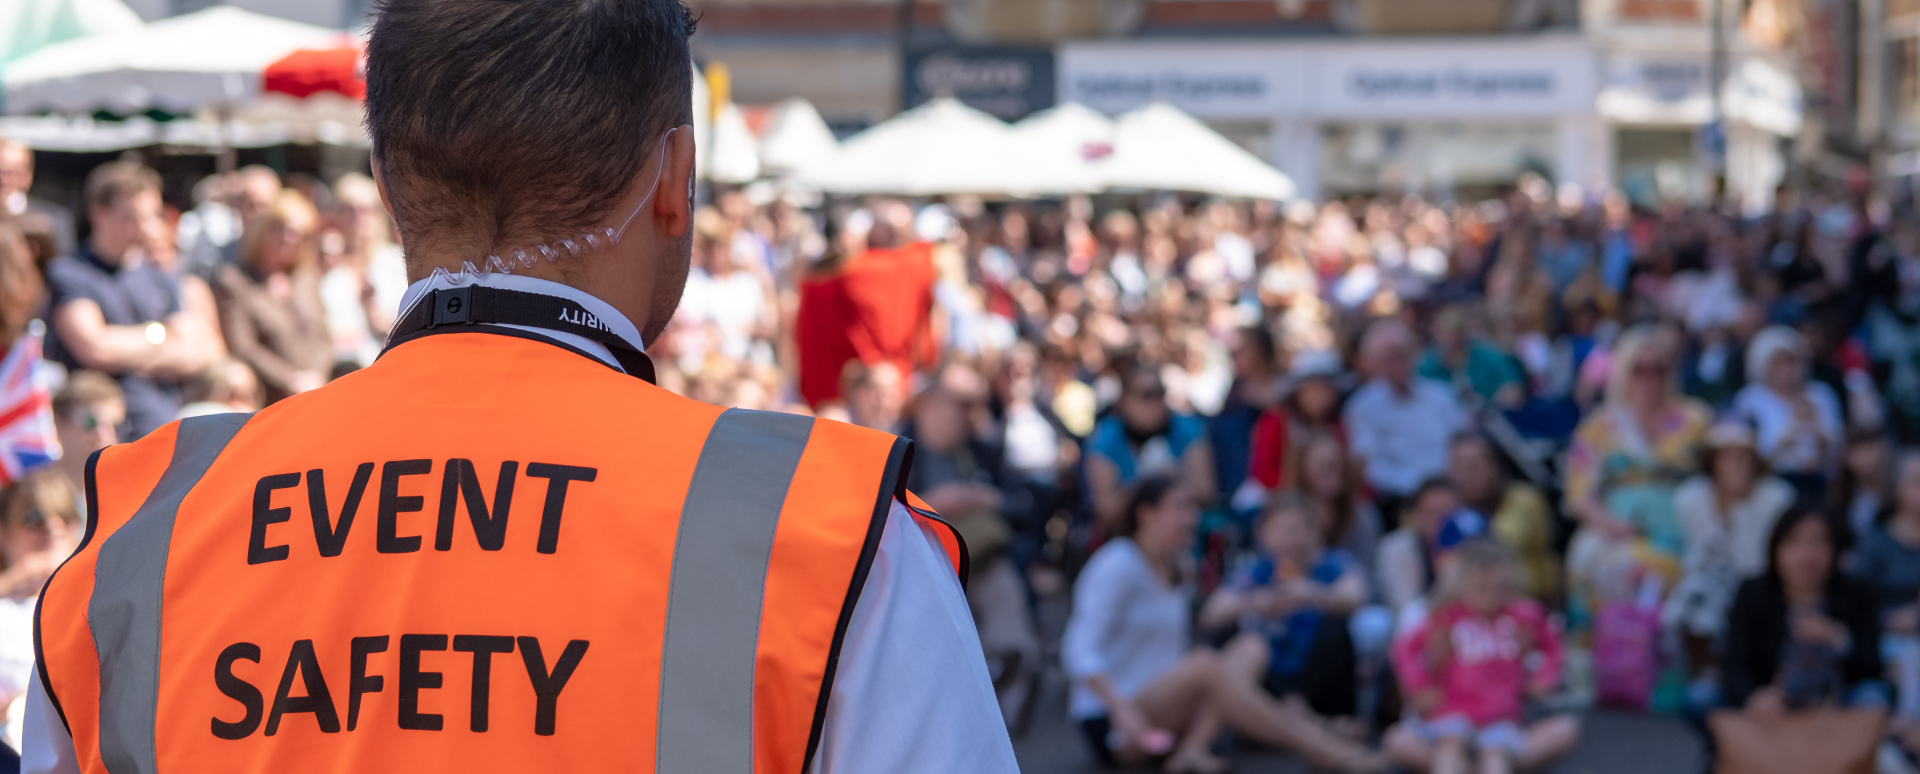 Man wearing an orange vest with event safety written on it as he controls crowds at an outdoor festival.